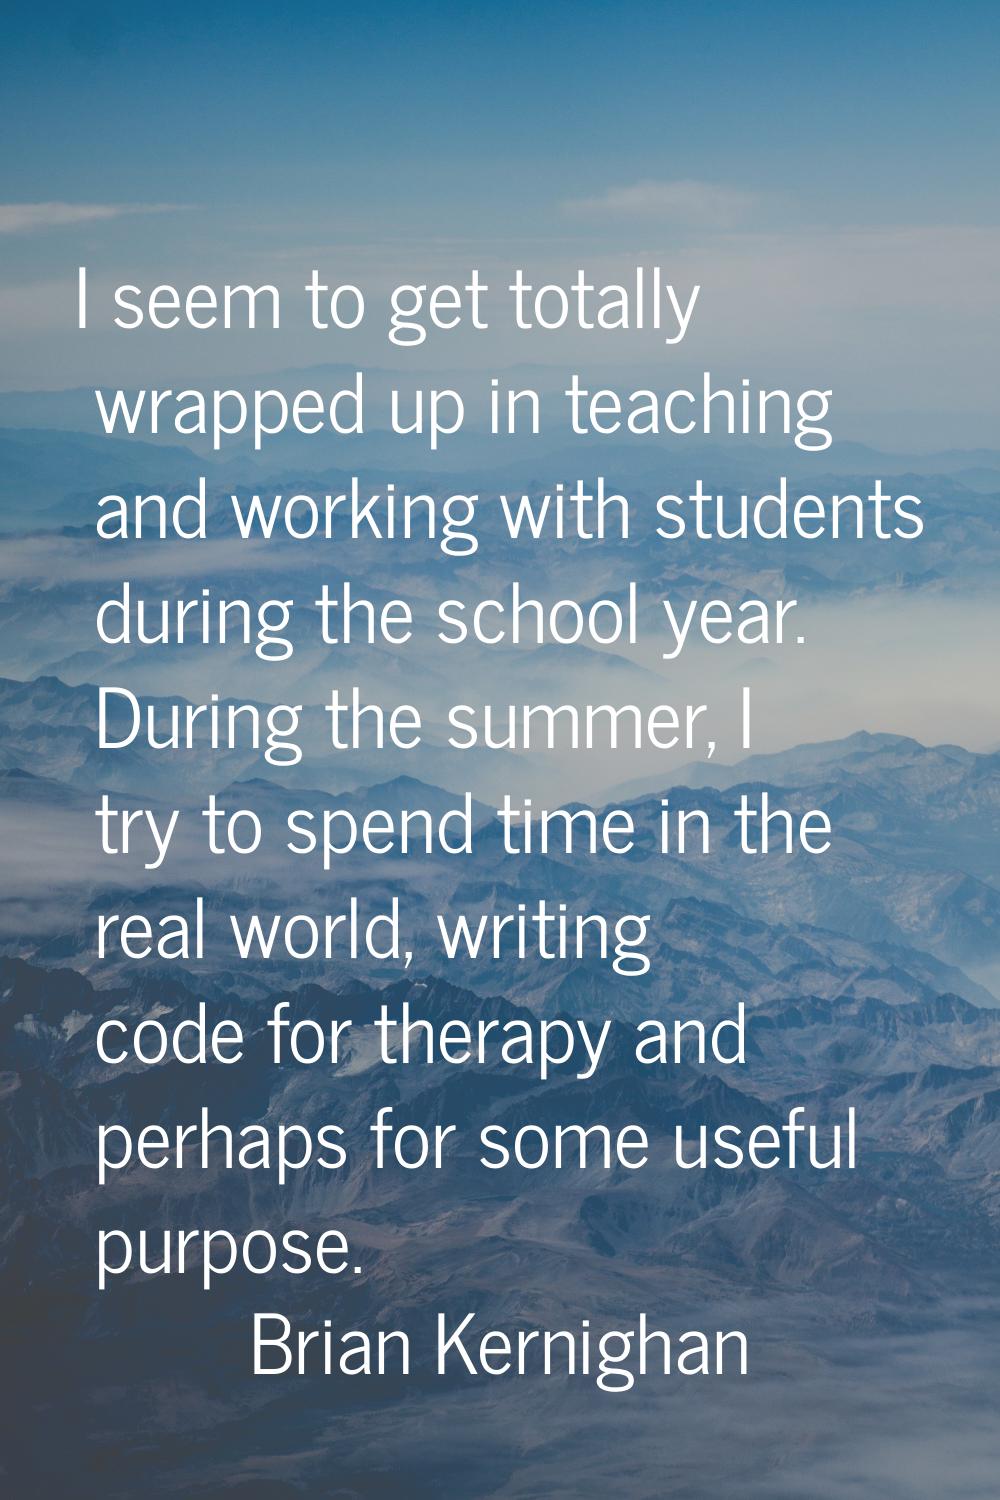 I seem to get totally wrapped up in teaching and working with students during the school year. Duri